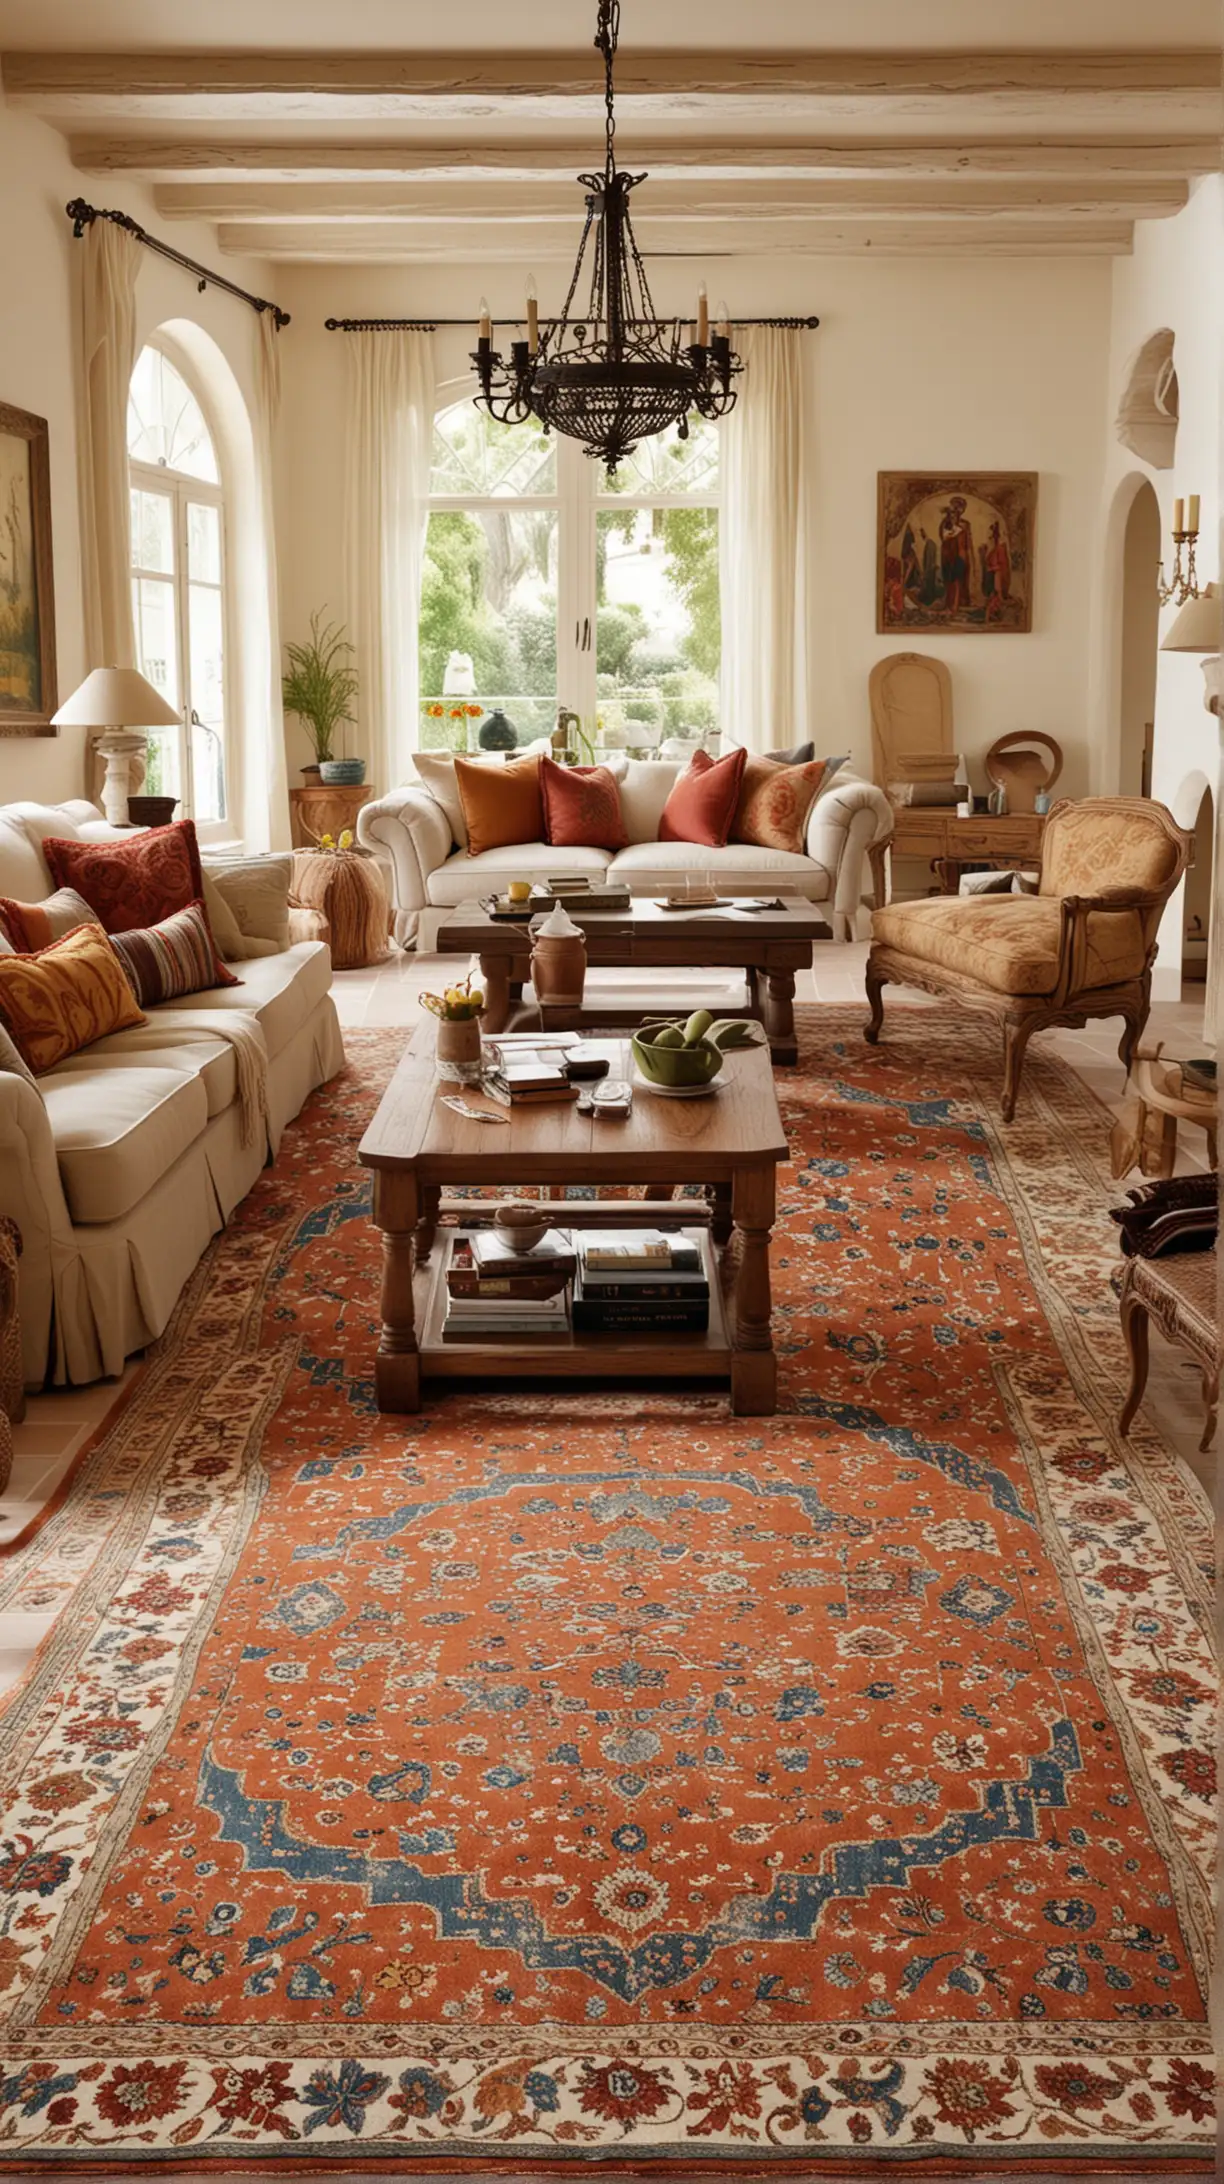 Elegant Mediterranean Living Room with Ornate Rugs Warmth and Colorful Patterns